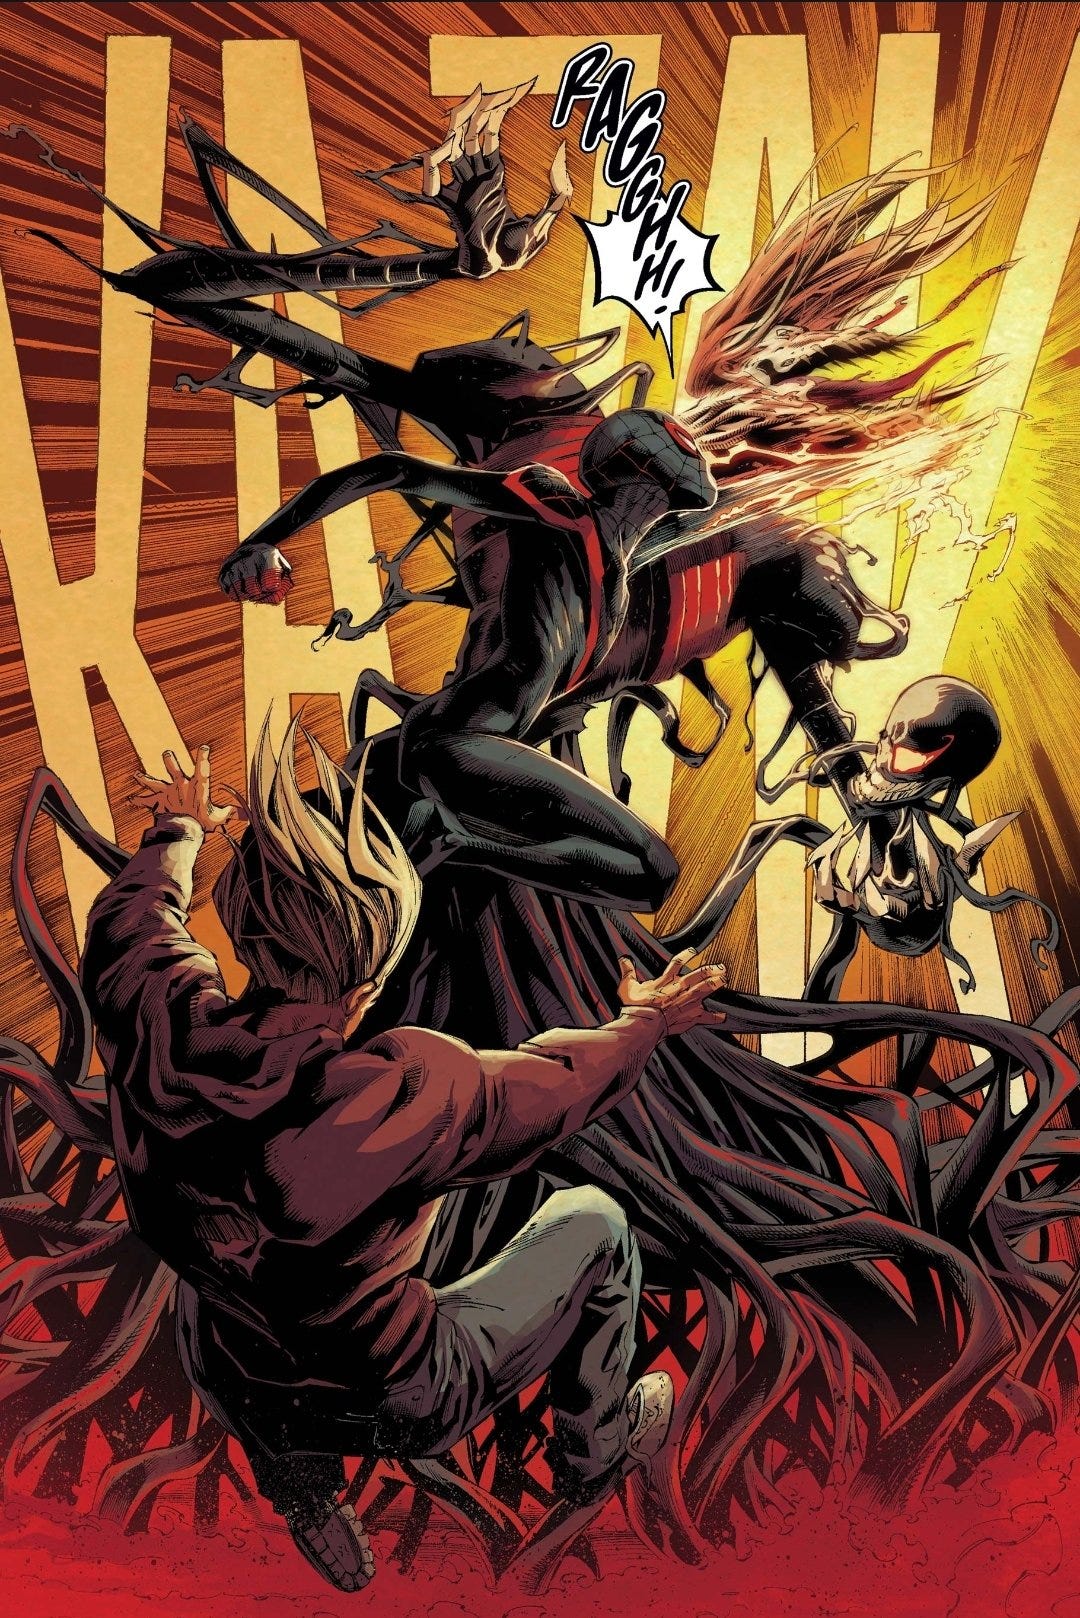 Daily Venom Panels on Twitter: "Spider-Man (Miles Morales) shows his  indomitable will against an impossible foe when he takes on Knull,  self-proclaimed God of the Symbiotes, to save Venom... and potentially, the